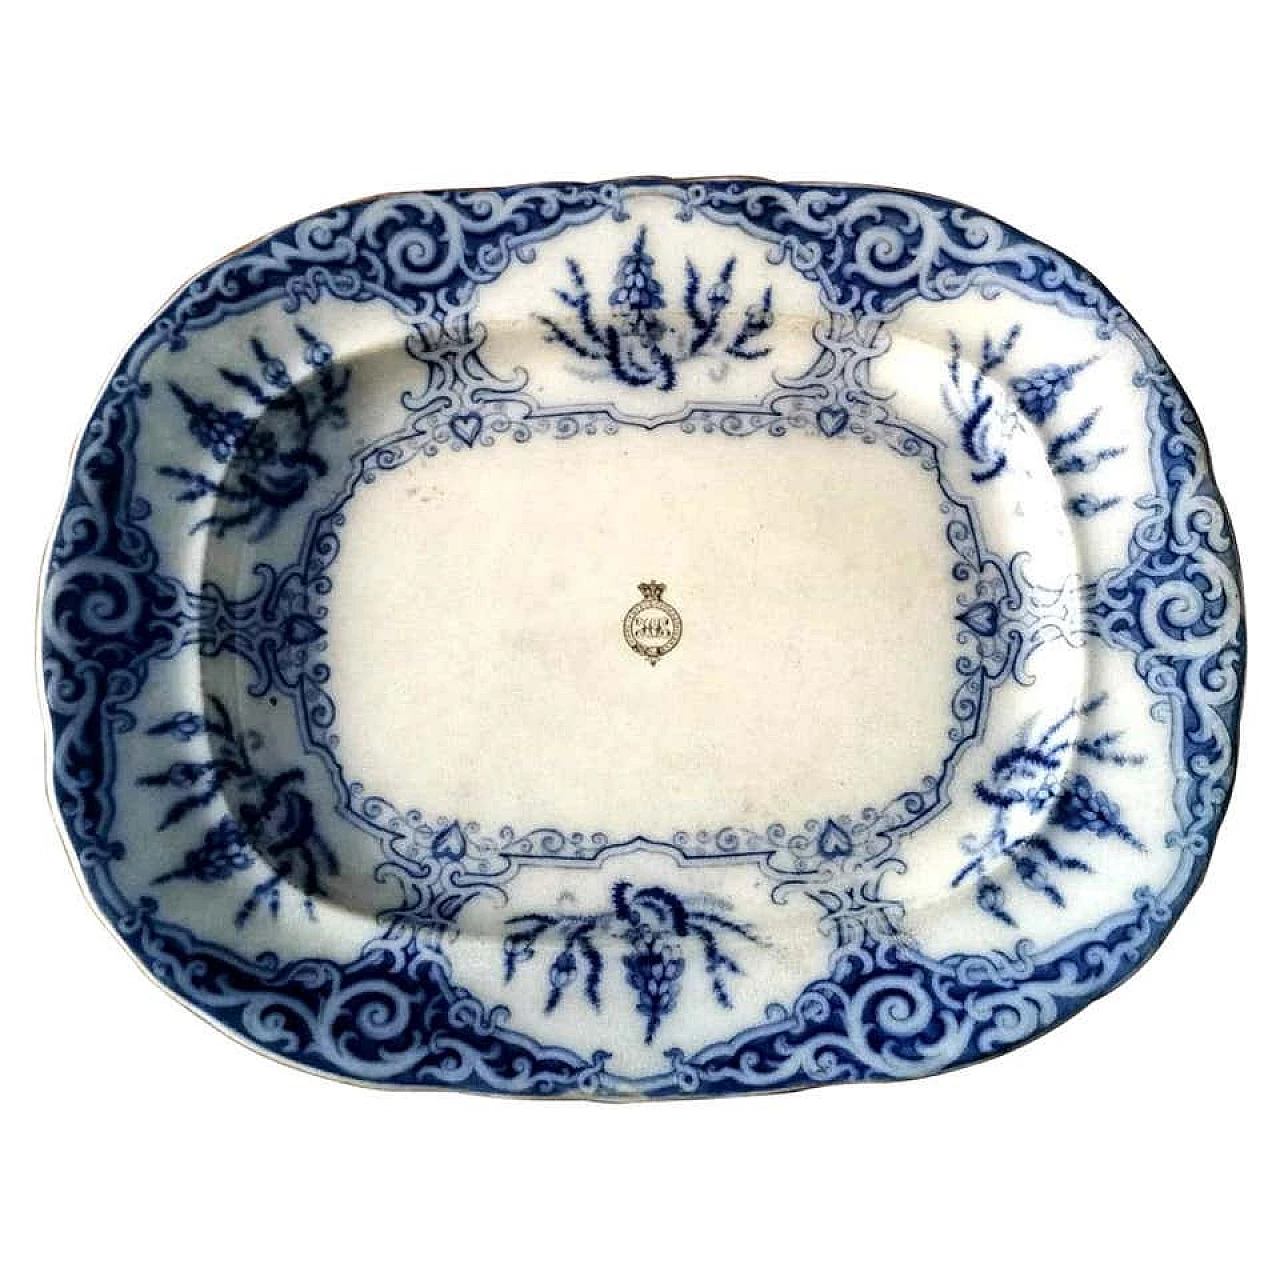 Victorian white and blue ceramic serving tray, 19th century 1188086